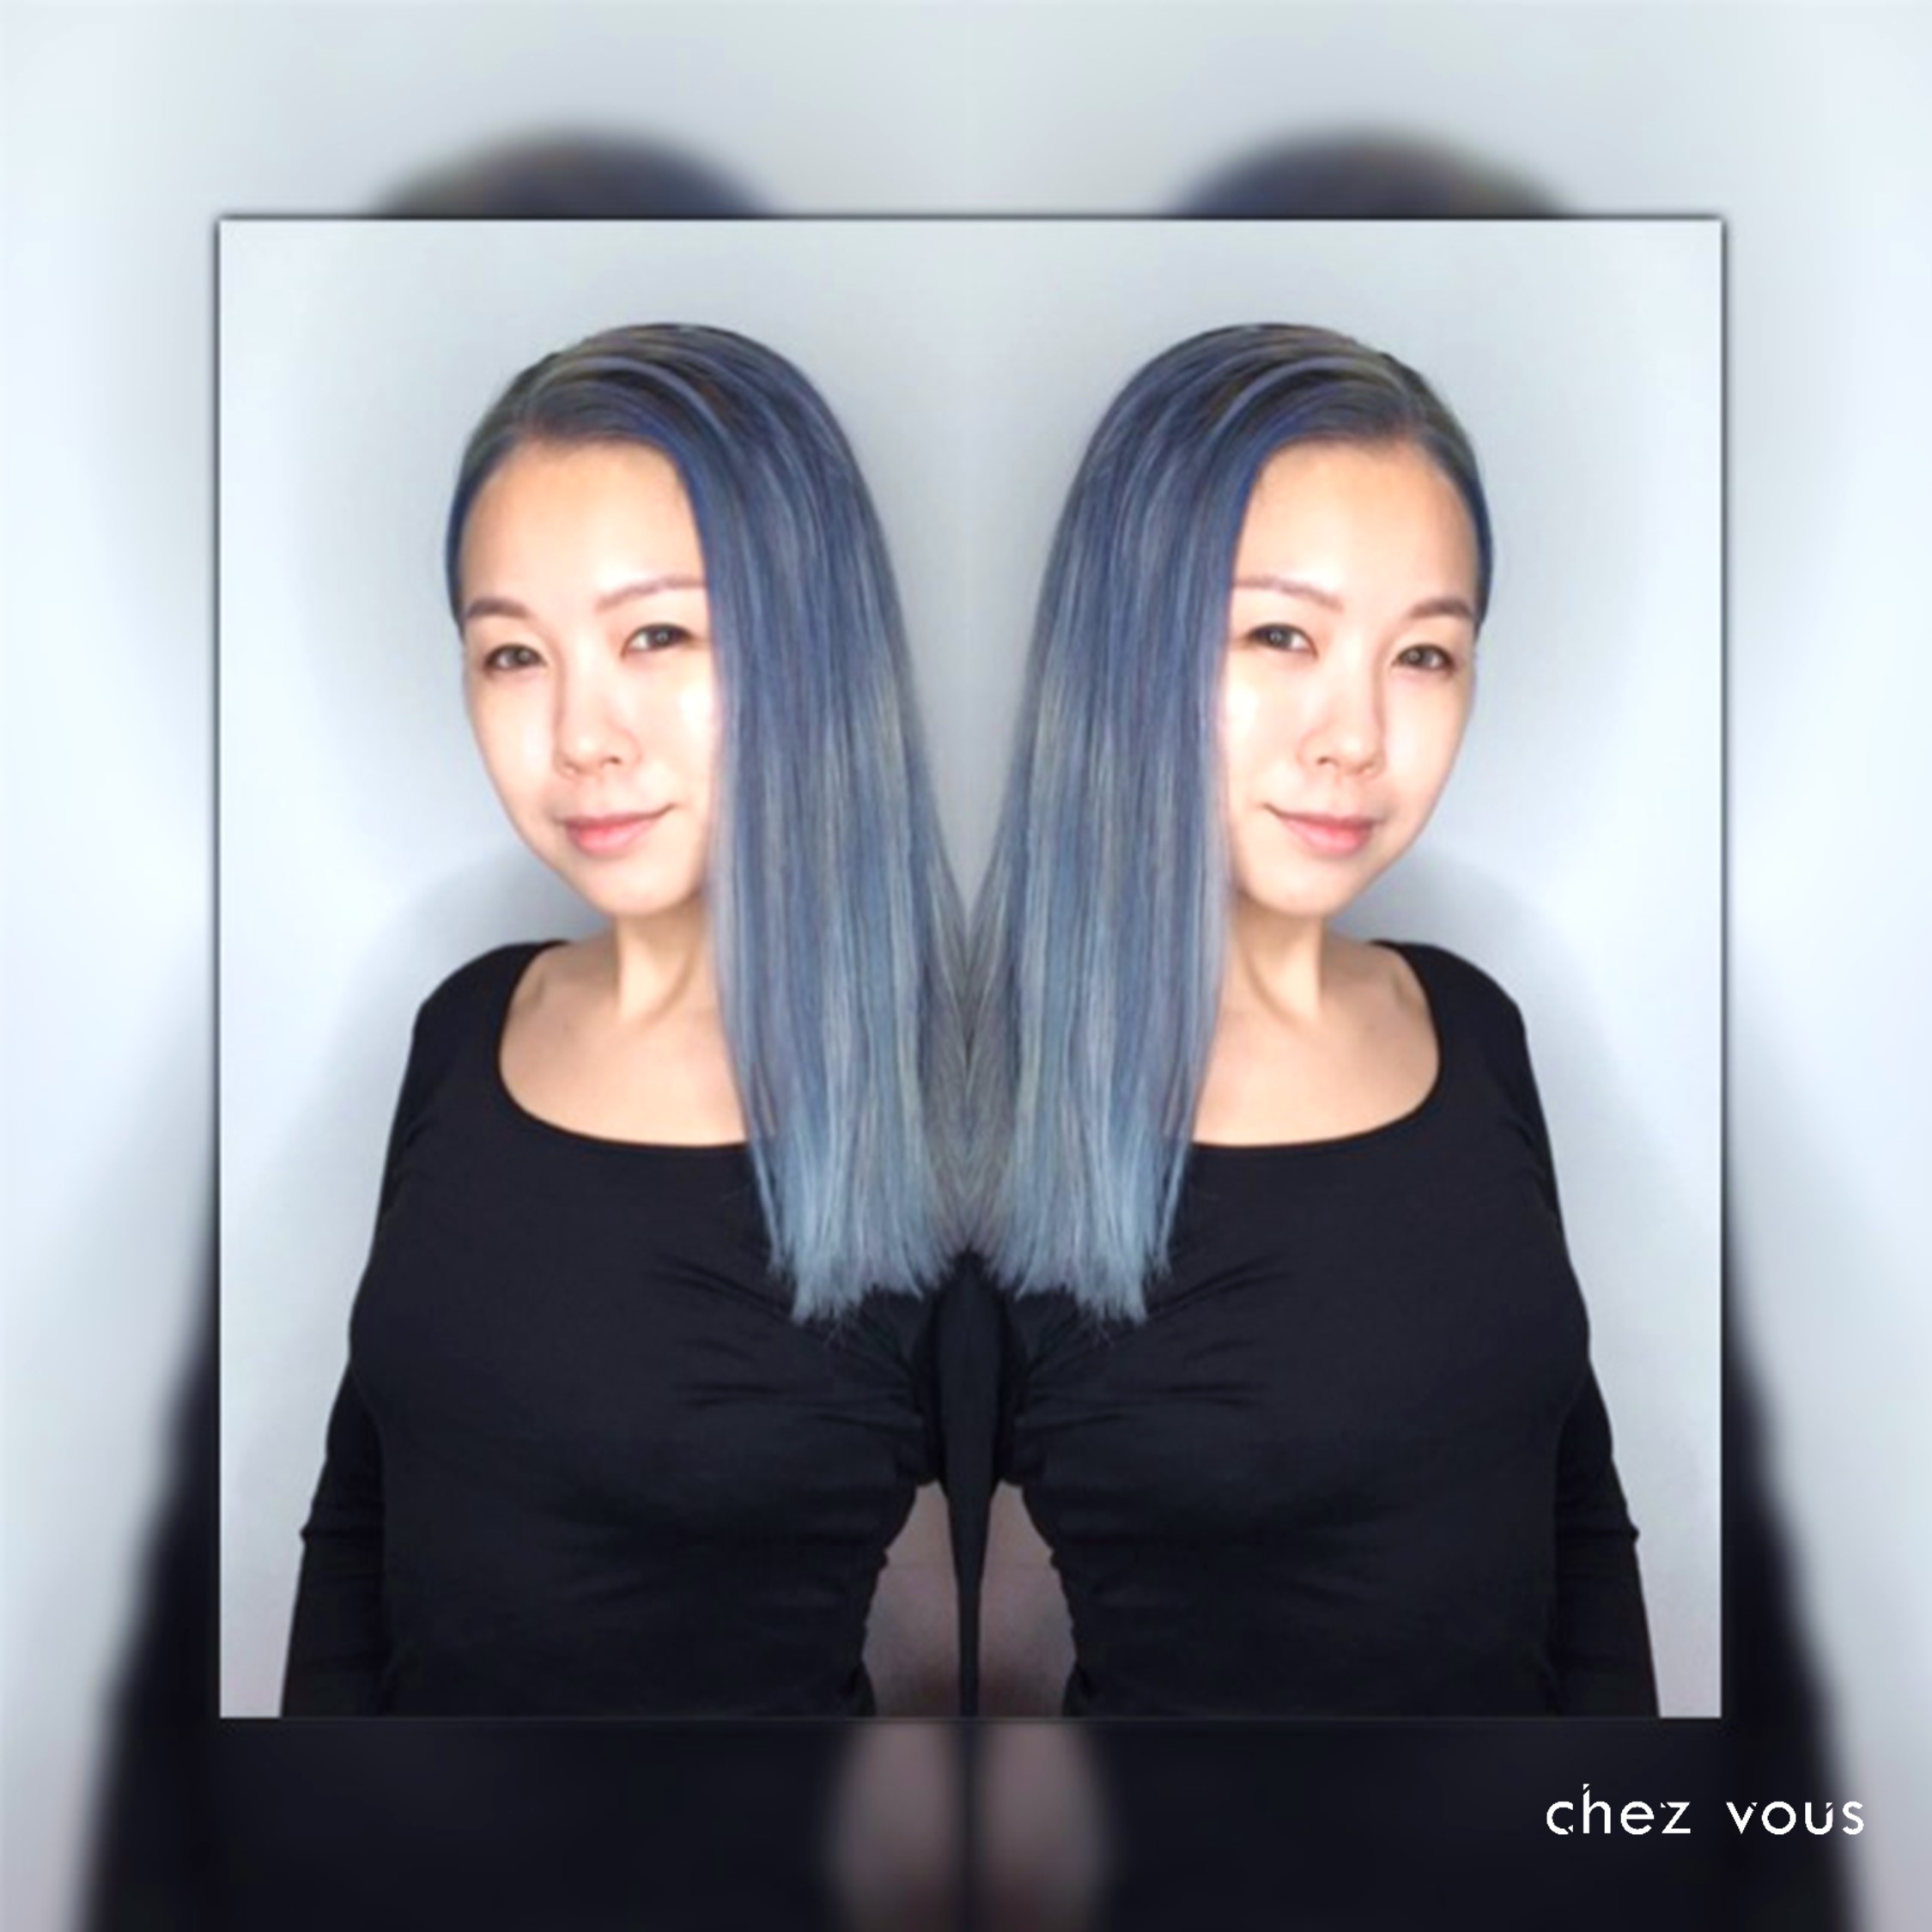 Done by Associate Salon Director of Chez Vous: Shawn Chia | Design: Faded Denim Blue